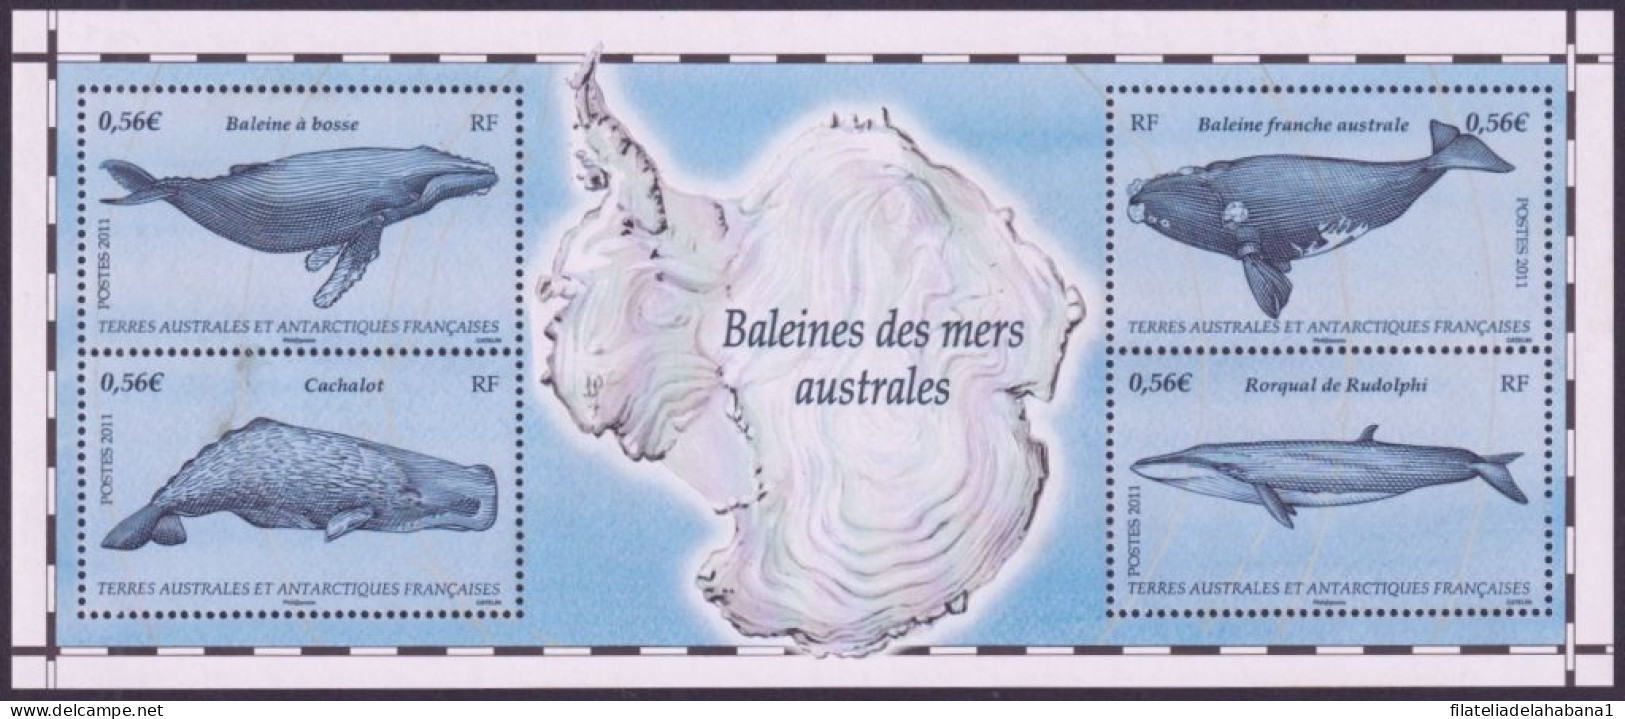 F-EX49834 TAAF FRANCE ANTARCTIC MNH 2011 MARINE WILDLIFE FISH WHALE OF SOUTHERN. - Whales